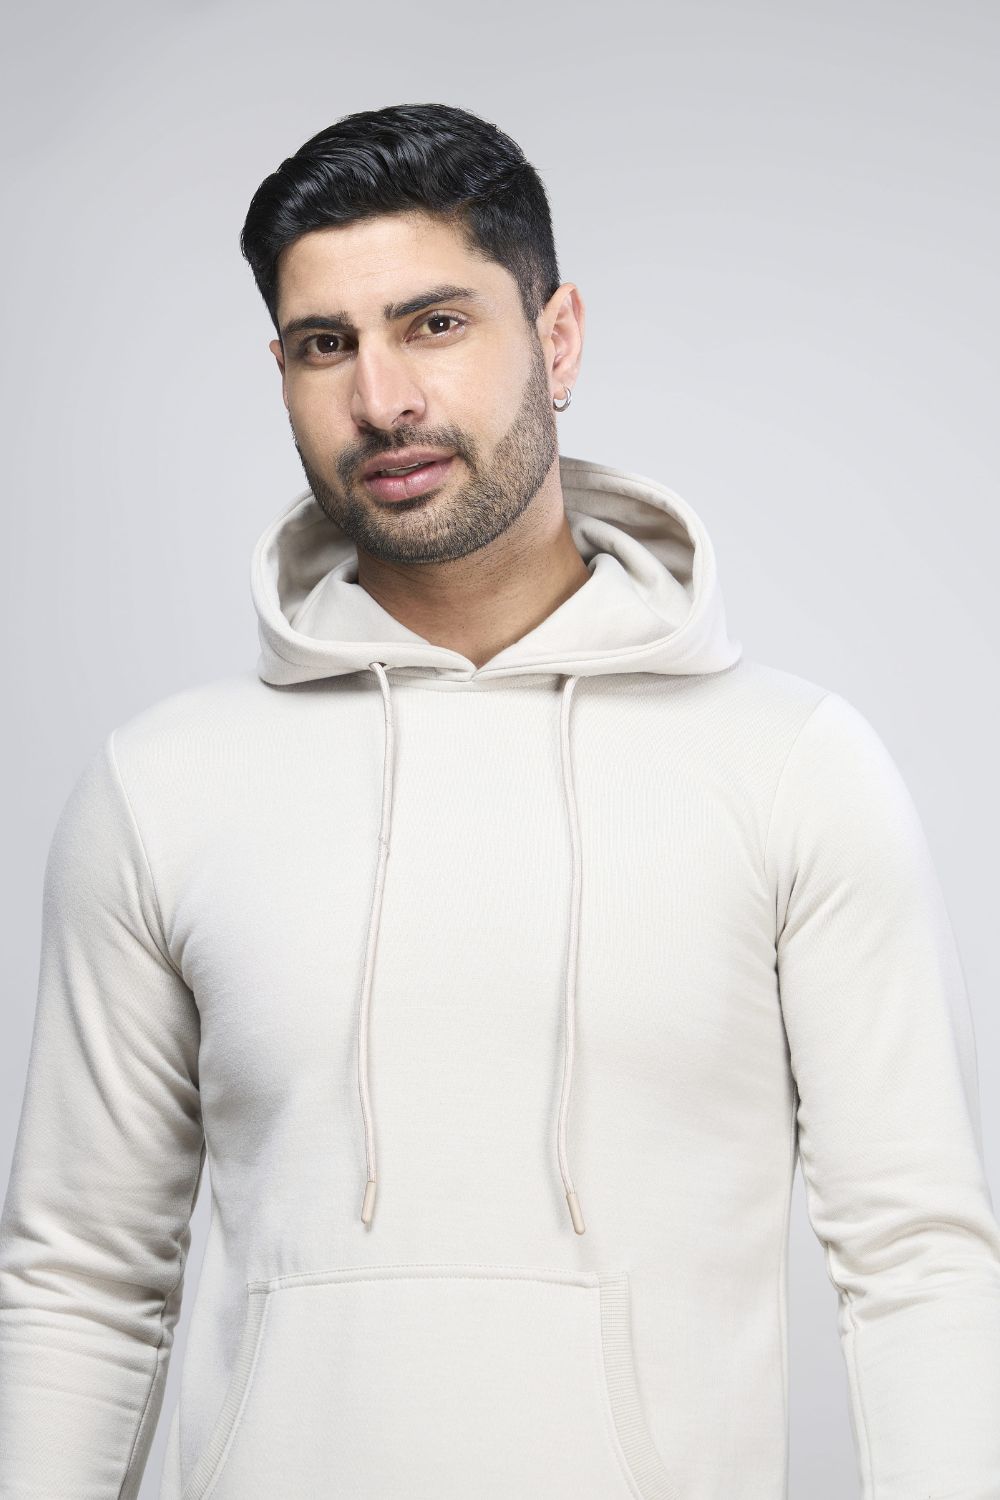 Silver Grey colored, hoodie for men with full sleeves and relaxed fit, close up.